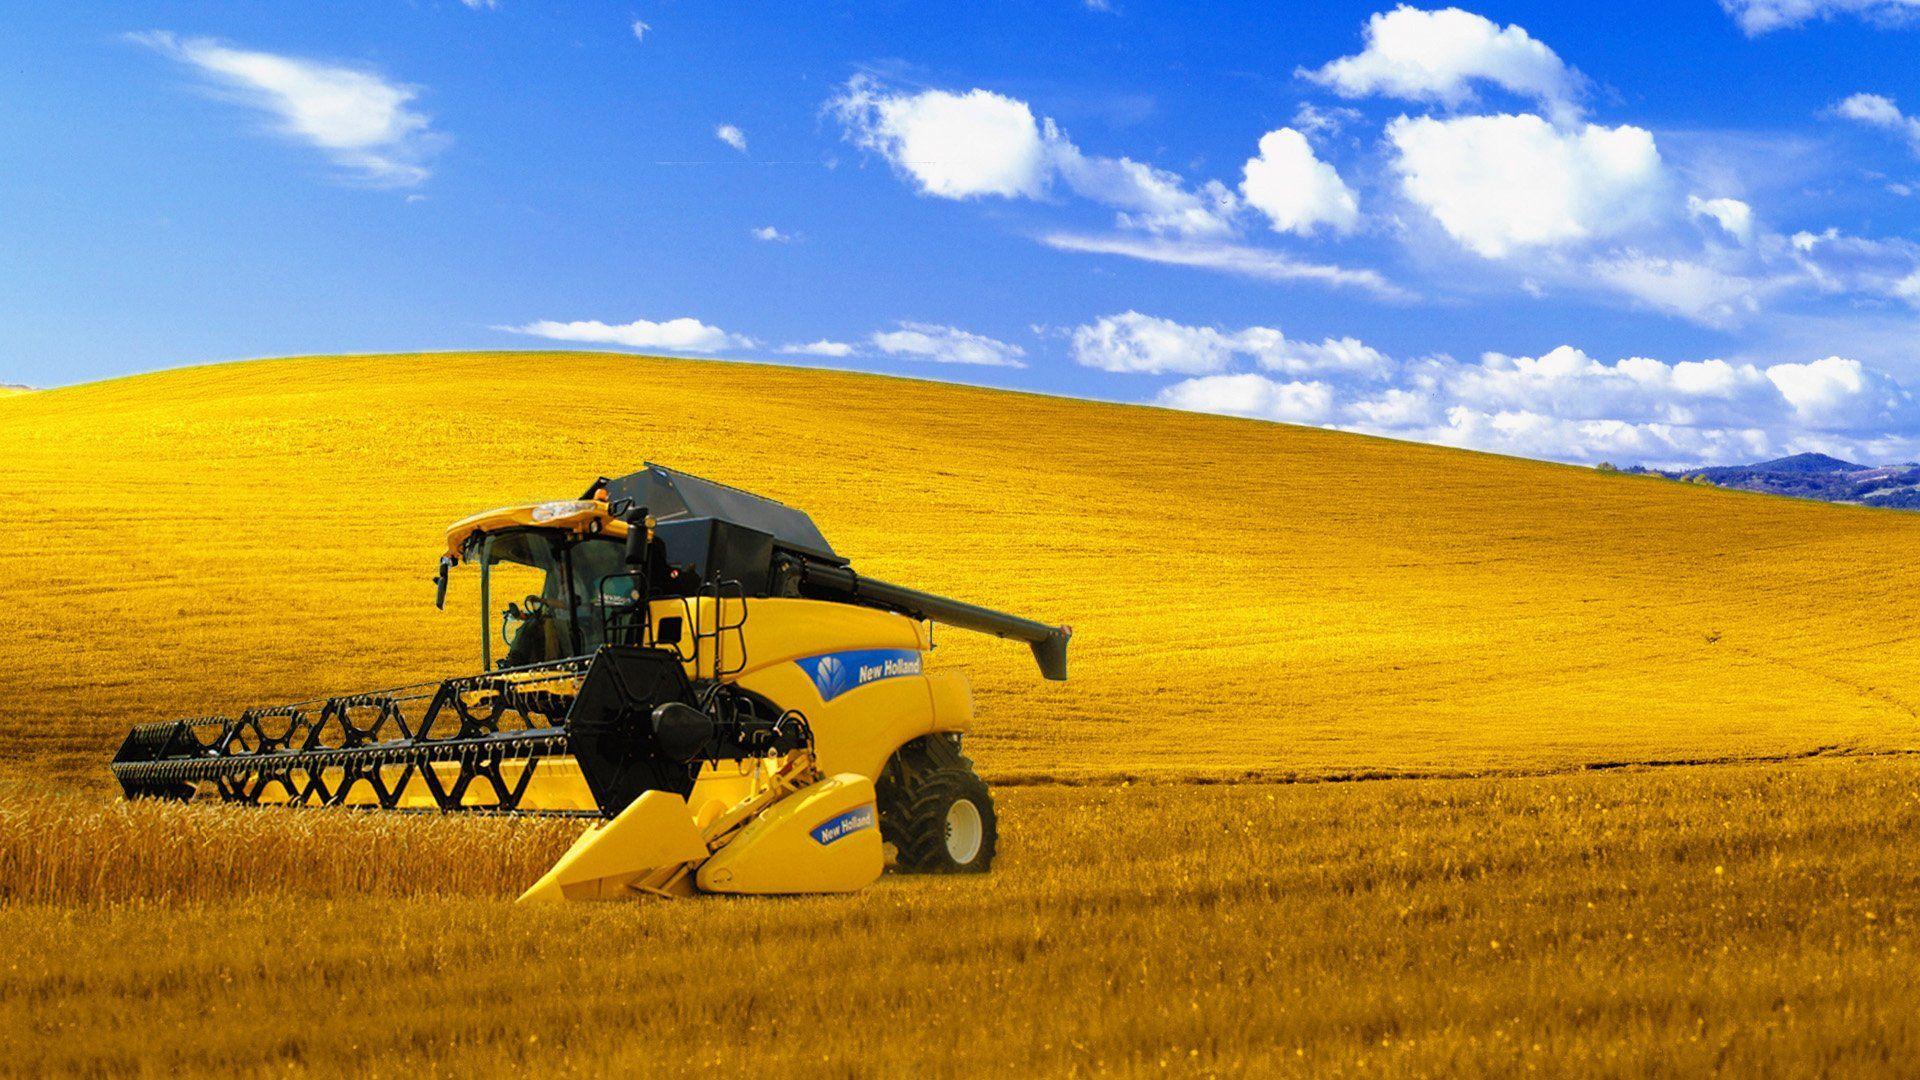 New Holland A Gallery By: TorinoGT